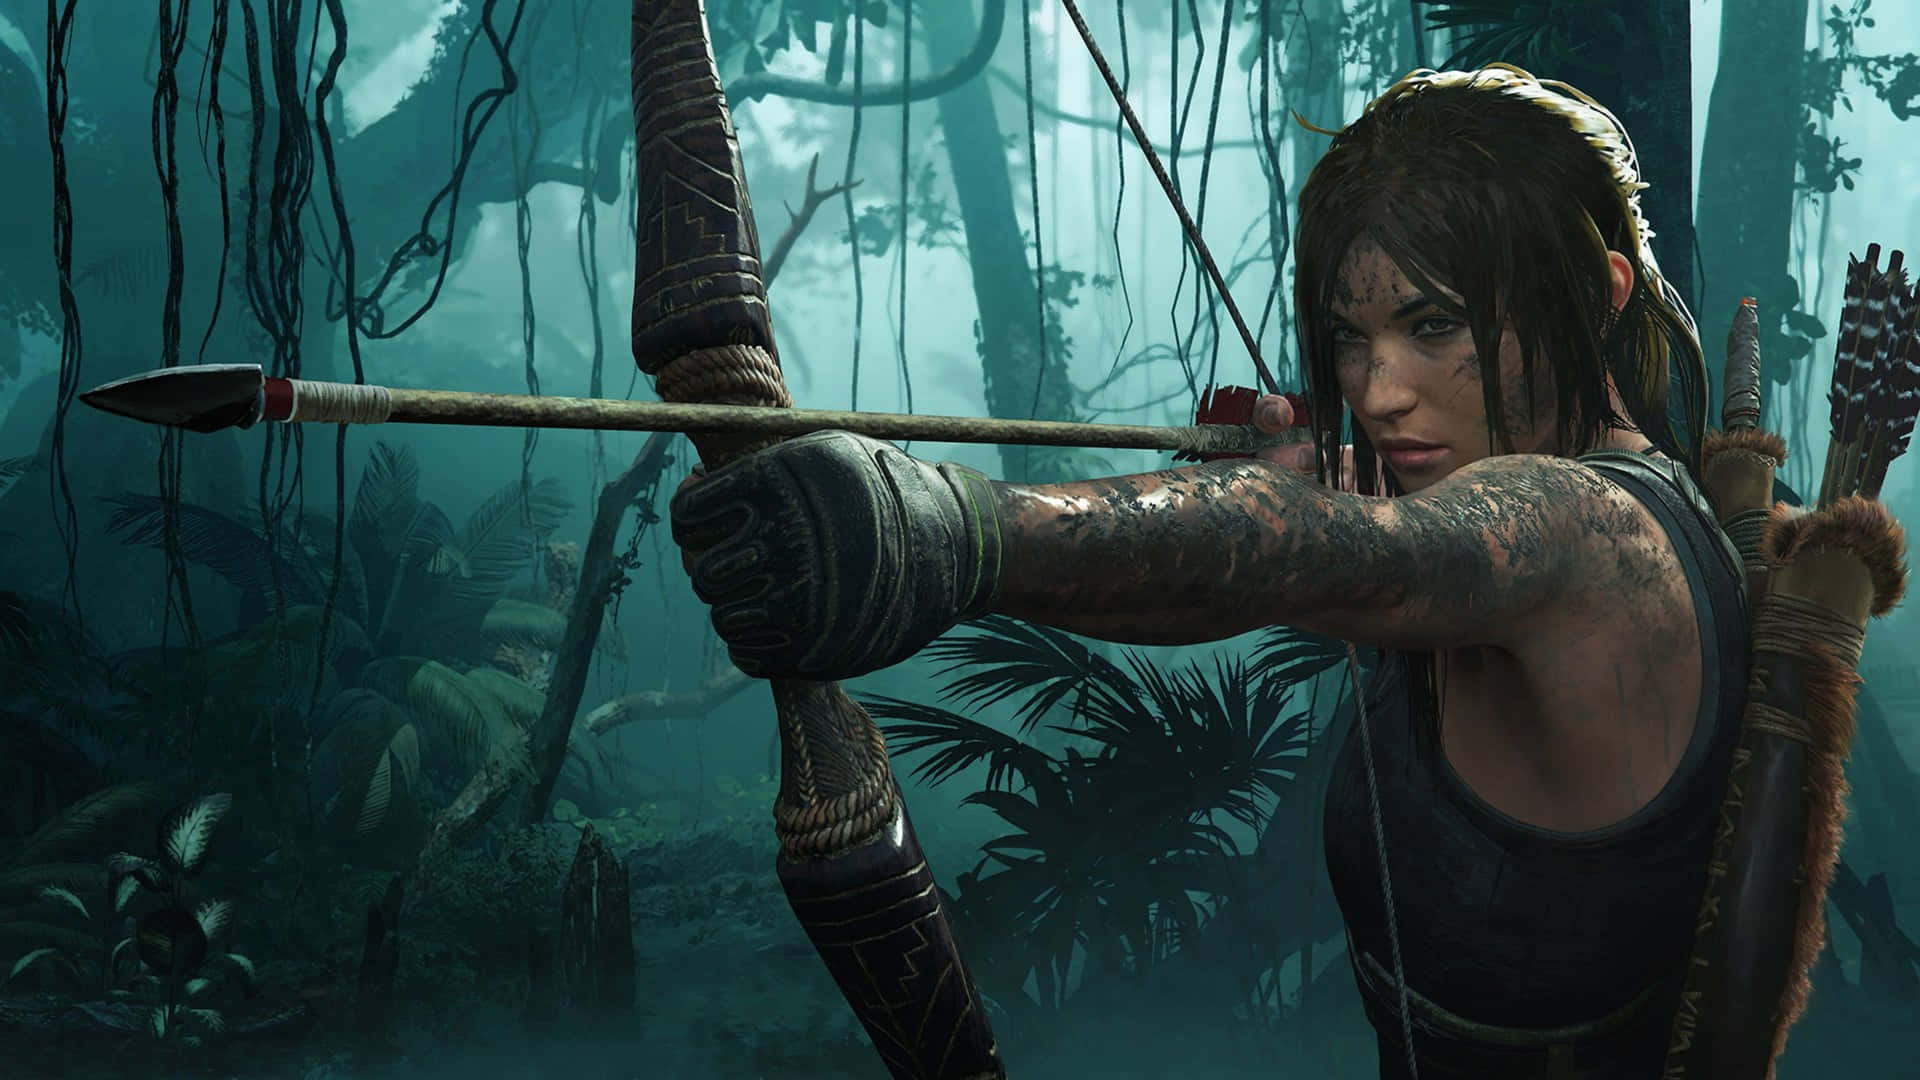 Dive into Adventure with Shadow of the Tomb Raider